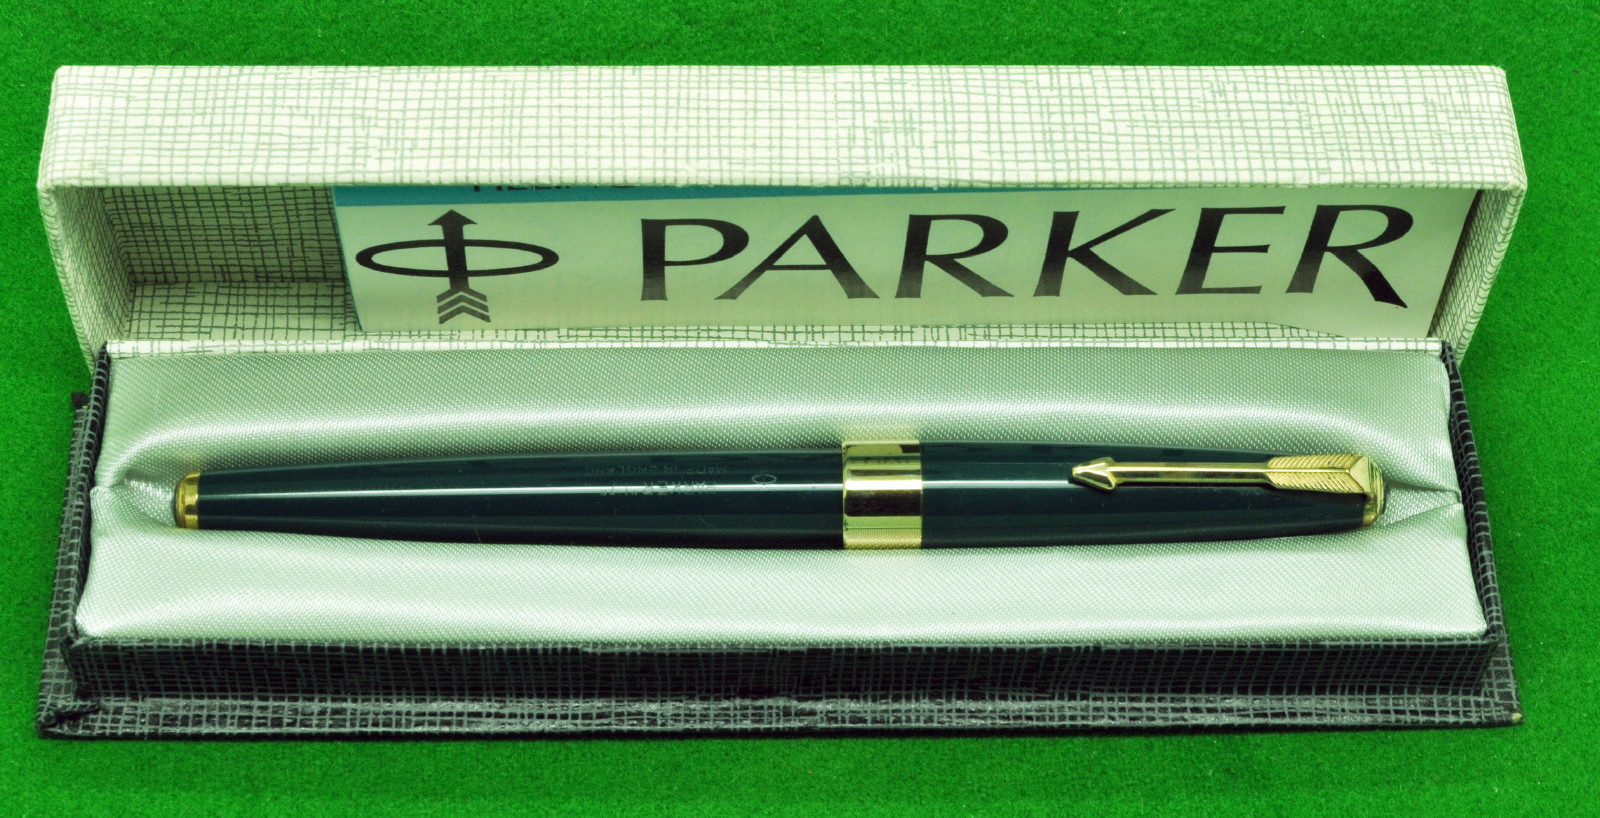 Parker Insignia Lacquer Sea Green & Gold Ballpoint Pen New In Box Made In Usa 